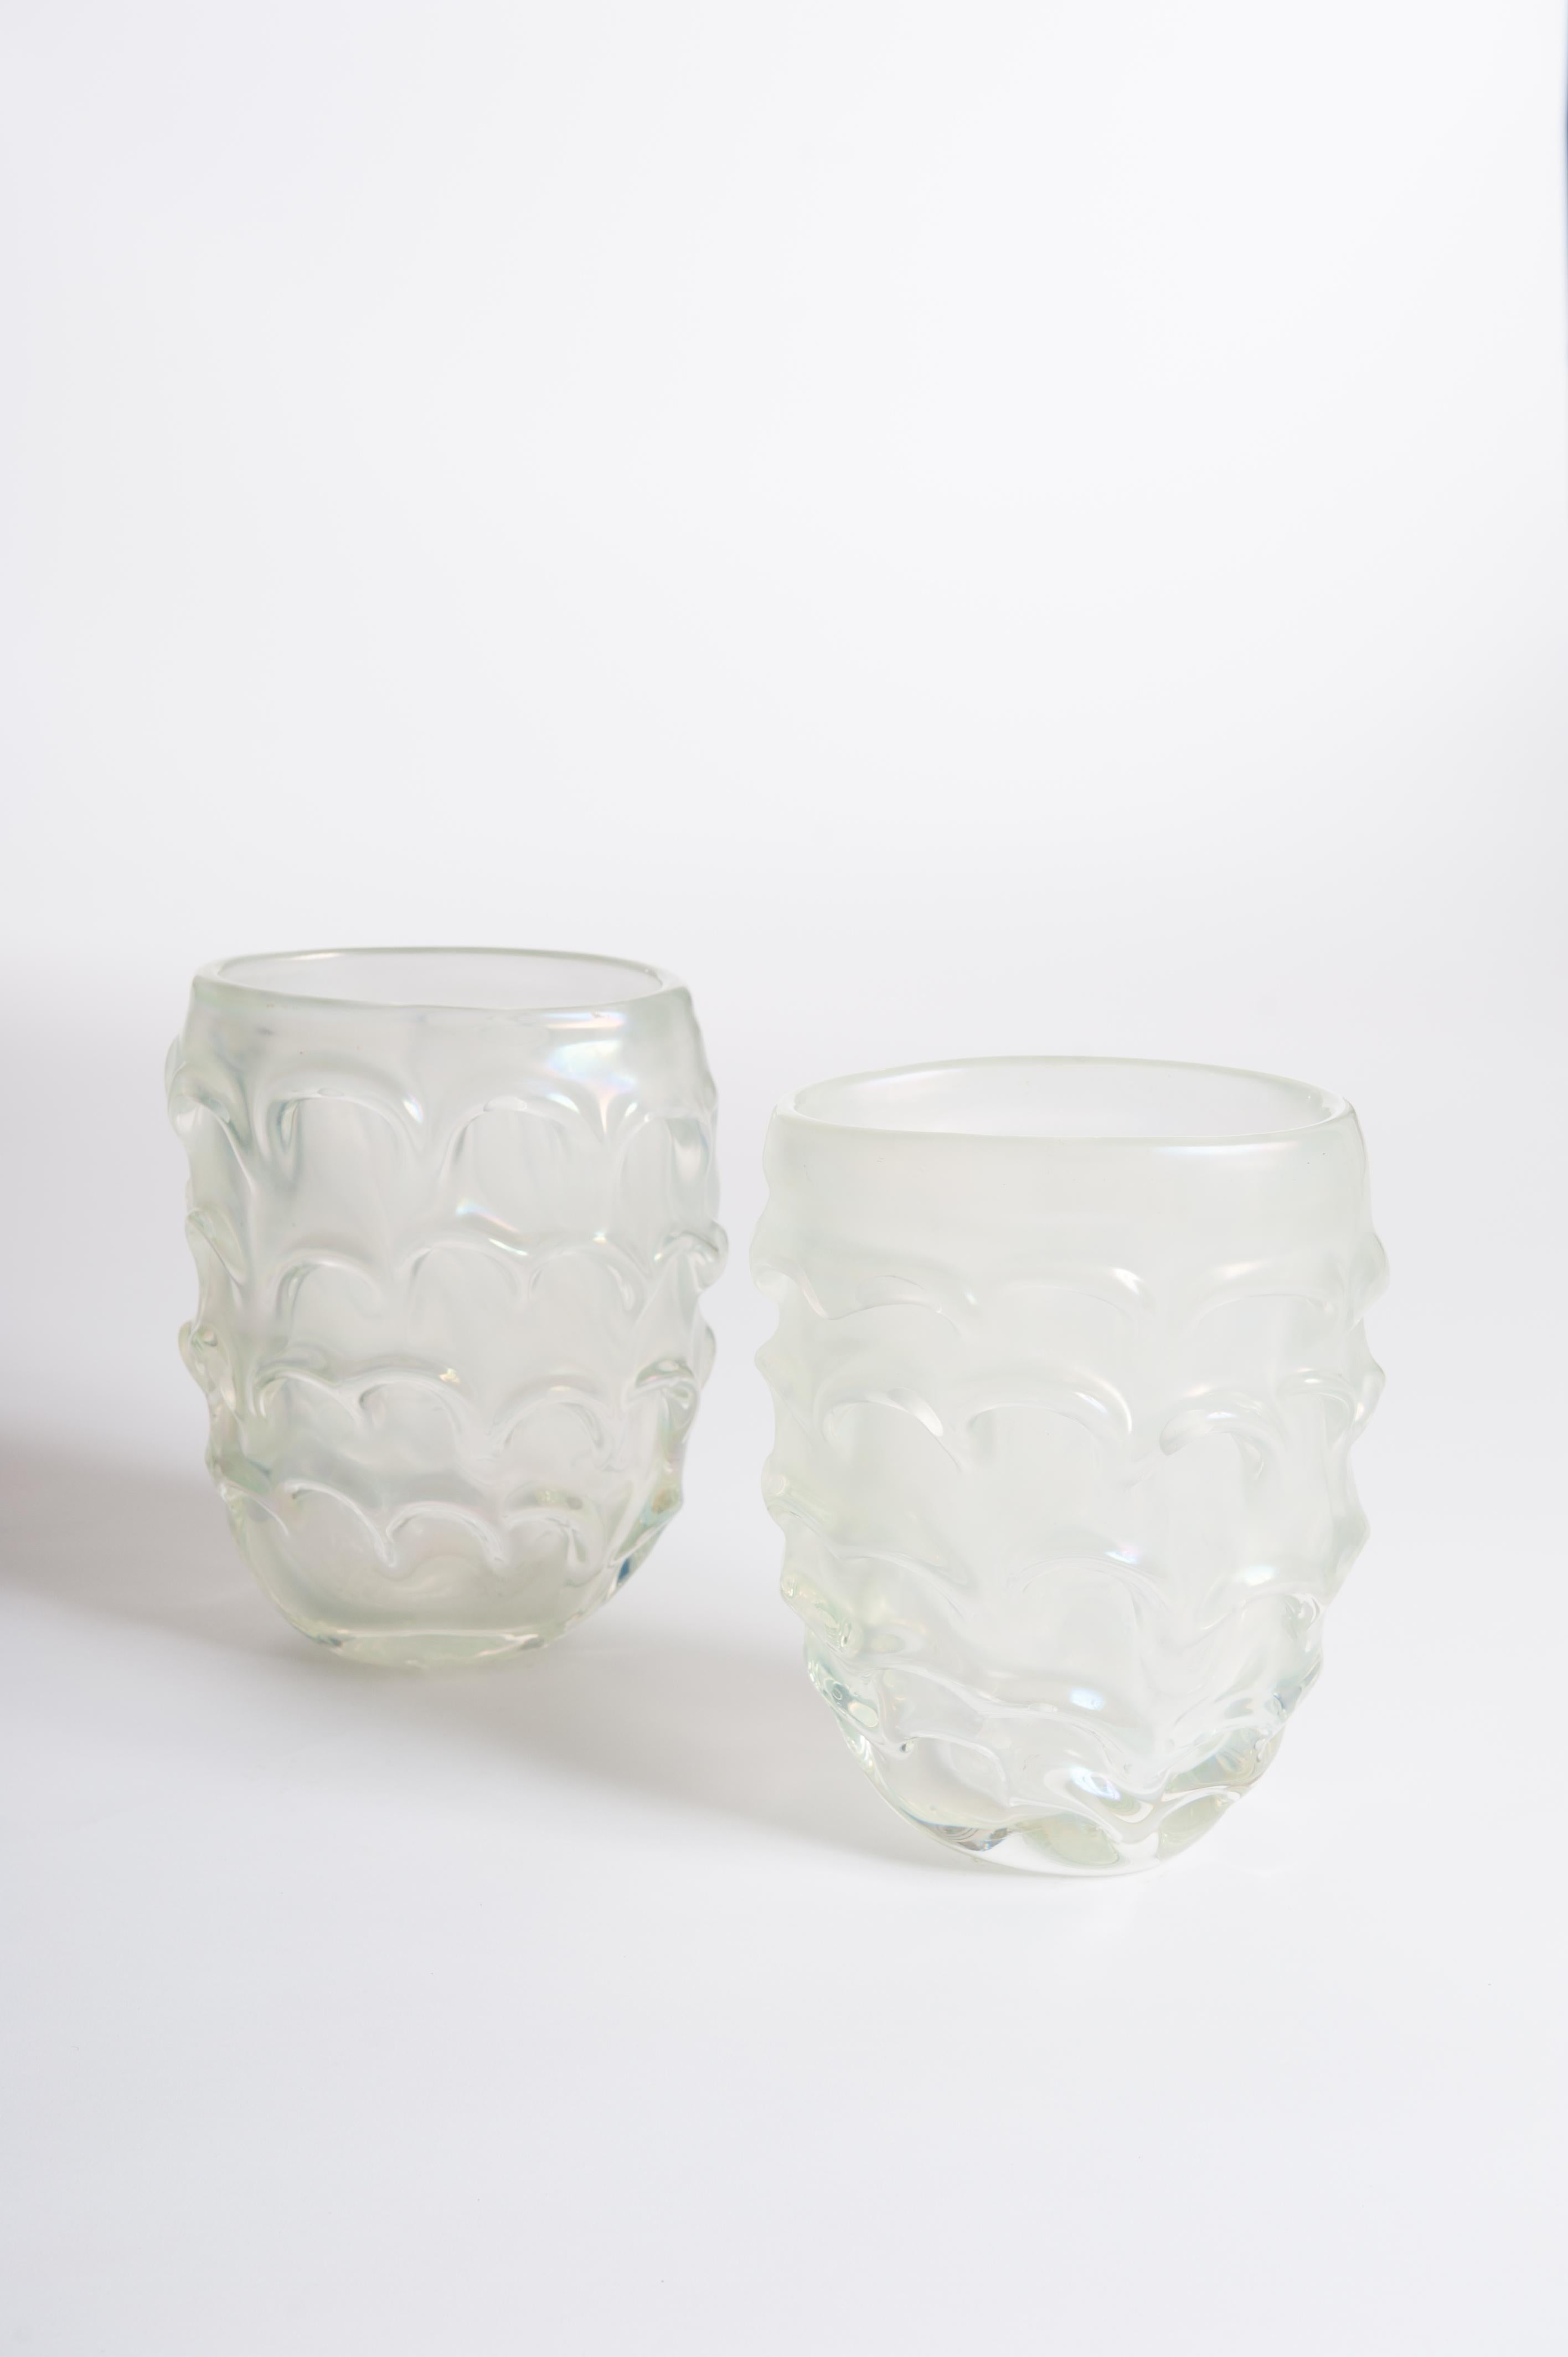 A pair of modern handcrafted Italian Murano glass vases light green-irisdecent colored with surreal impression.
The oval shaped body out of opaline Murano glass shows glass movements outside on the surface and turns the
vase into a sculpture. The